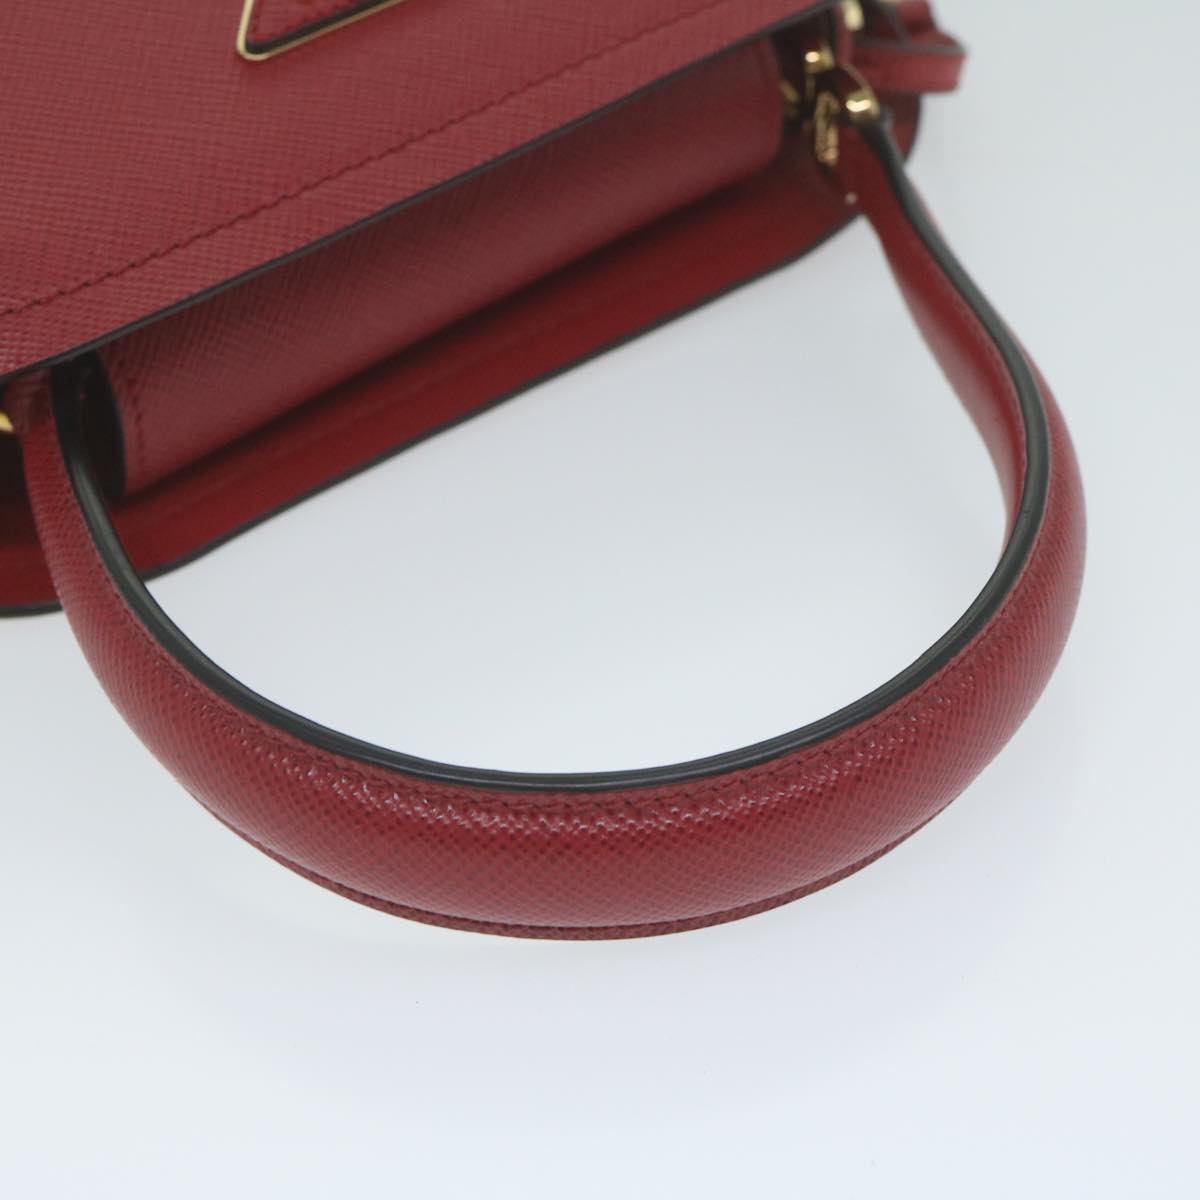 Prada Women's Luxurious Red Leather Hand Bag with Textured Finish by Prada in Red